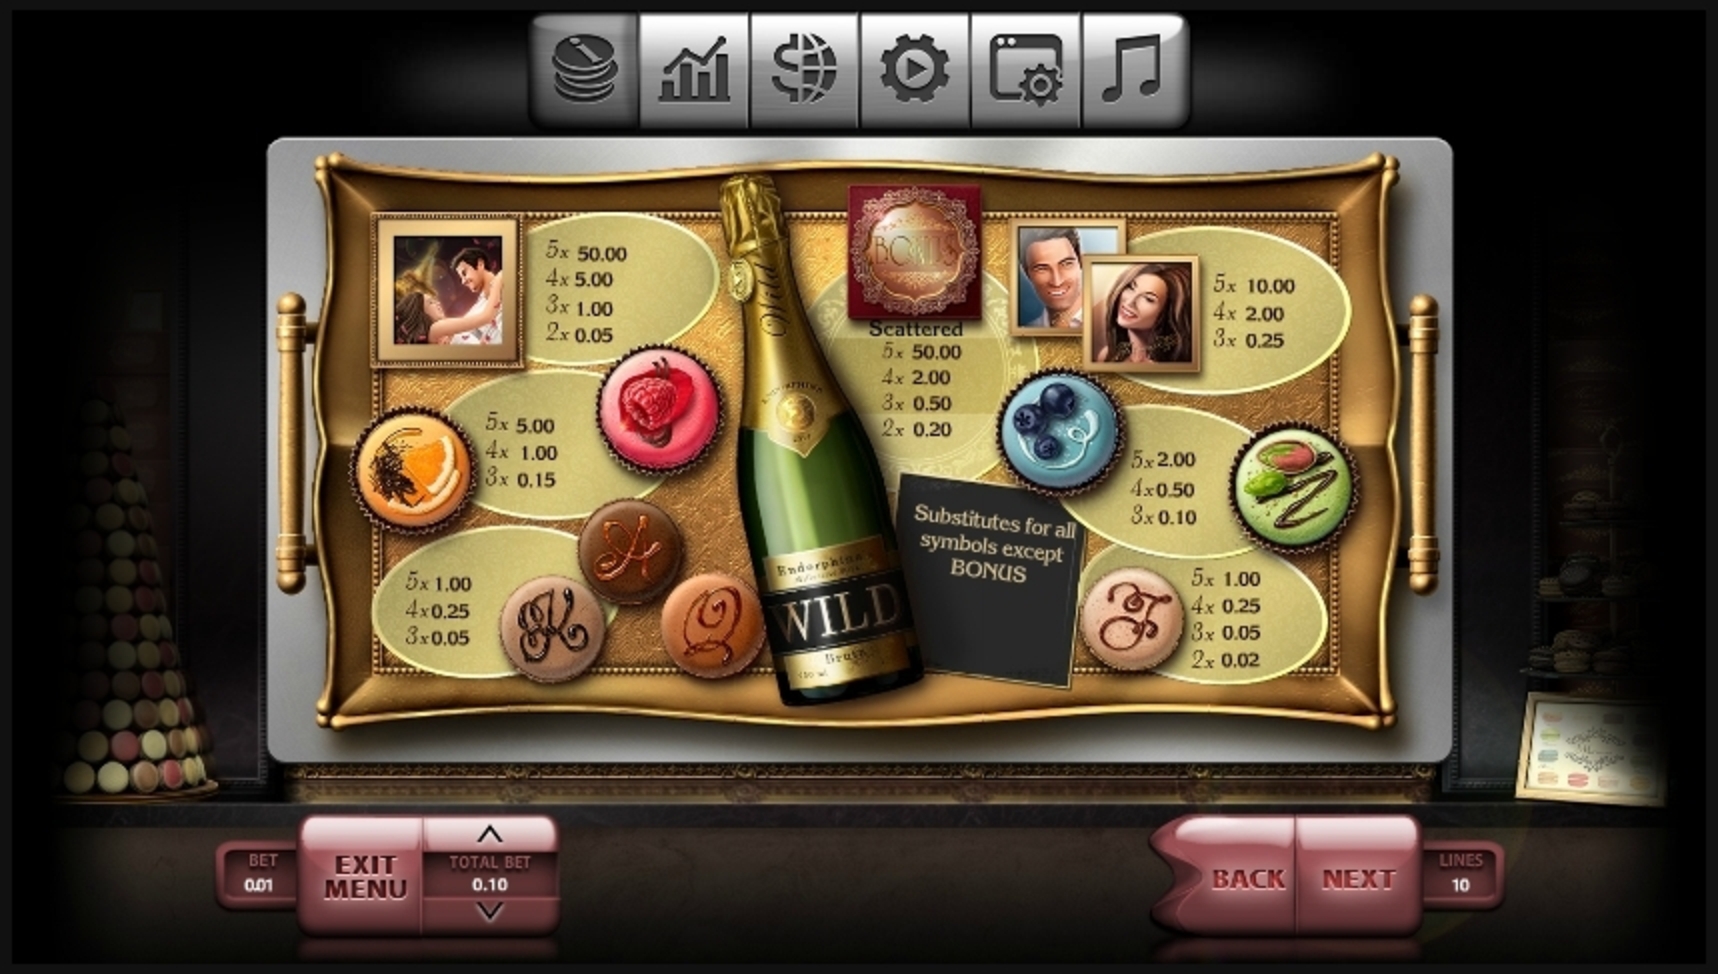 Info of Macarons Slot Game by Endorphina